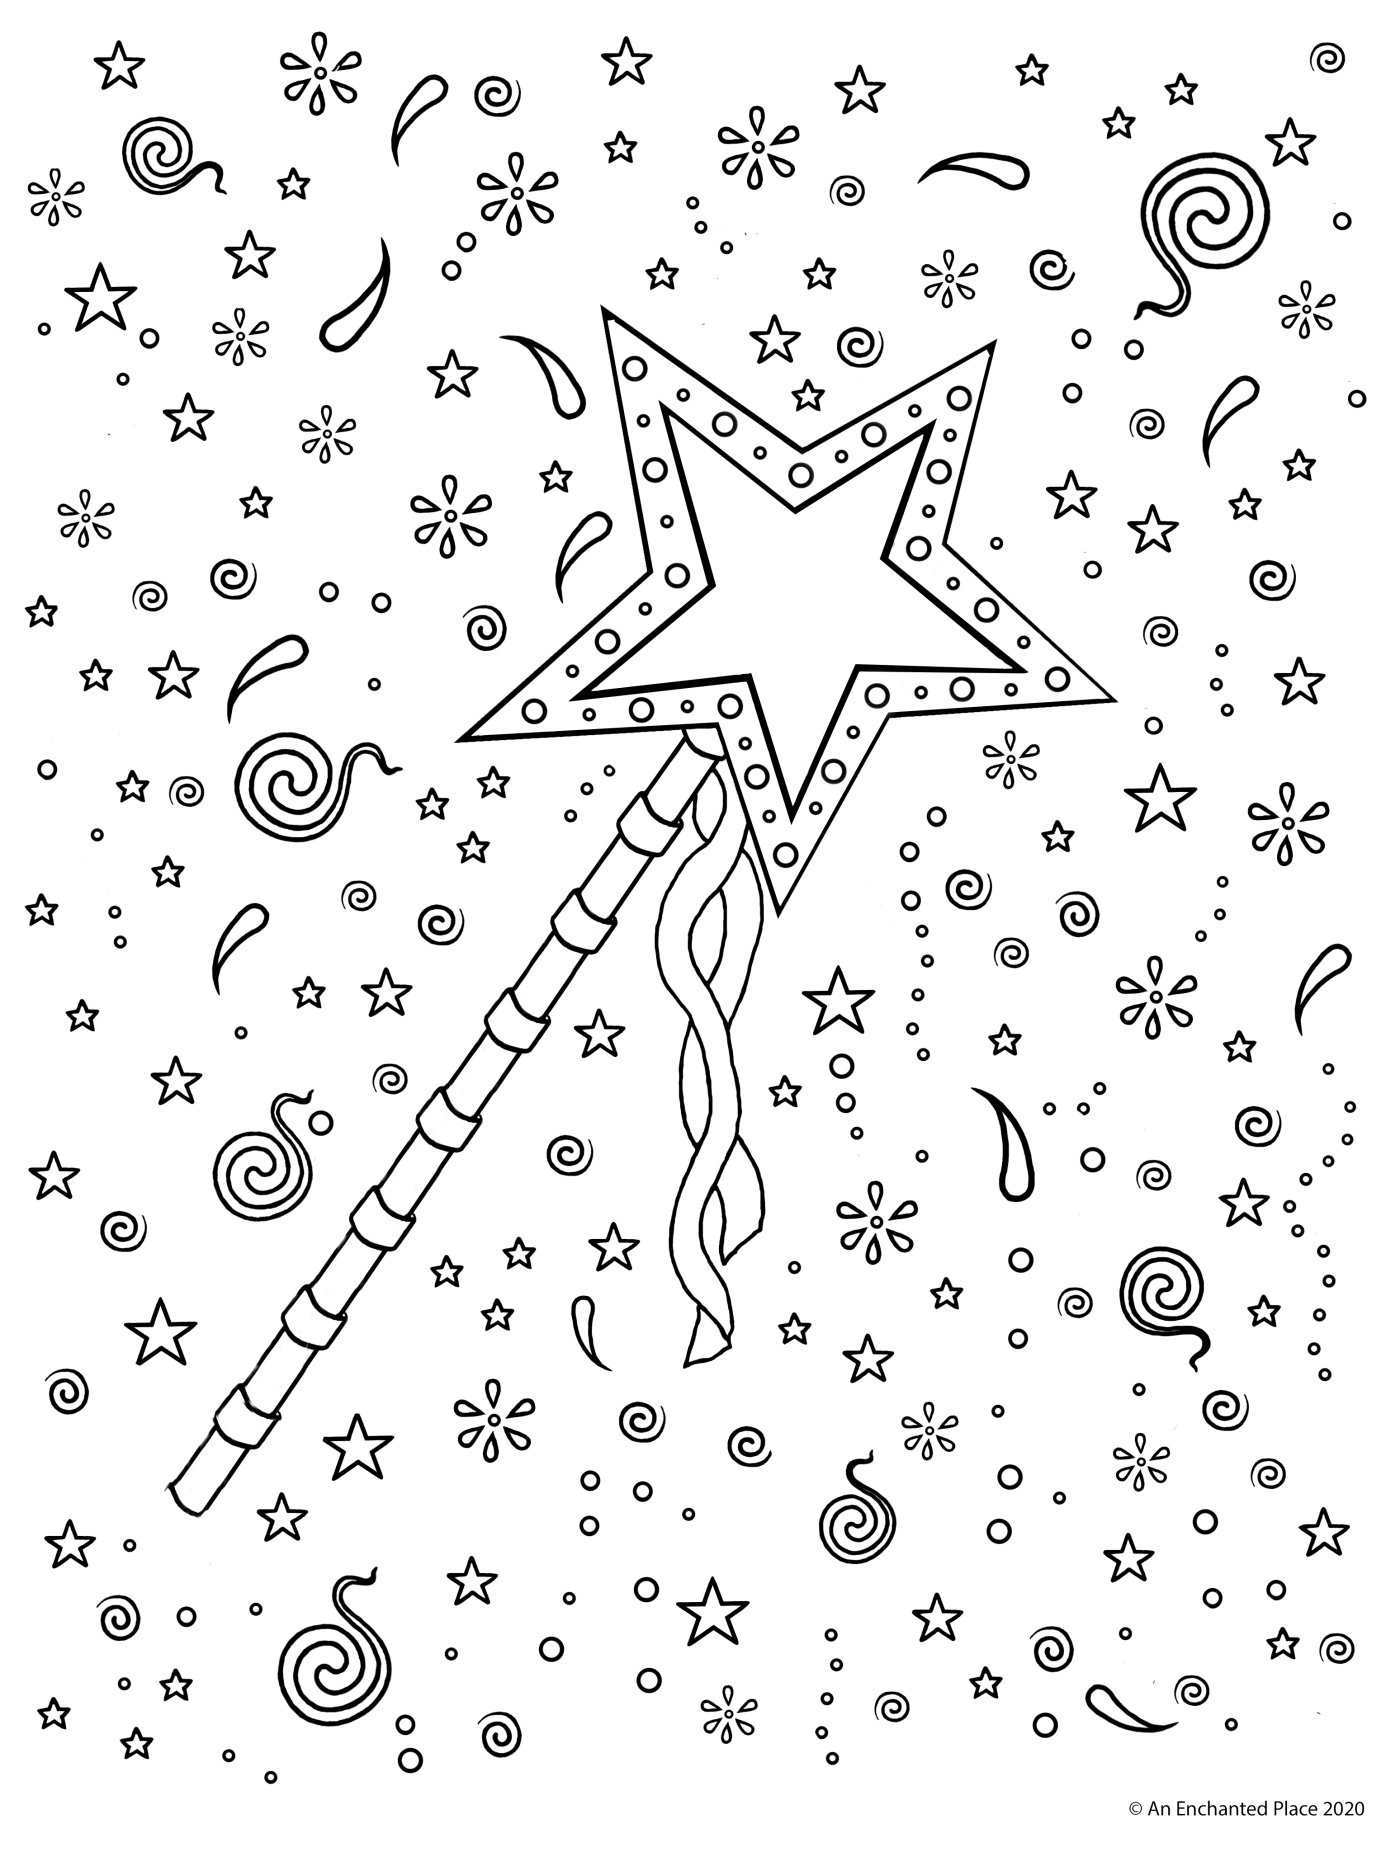 Magic wand colouring picture â an enchanted place